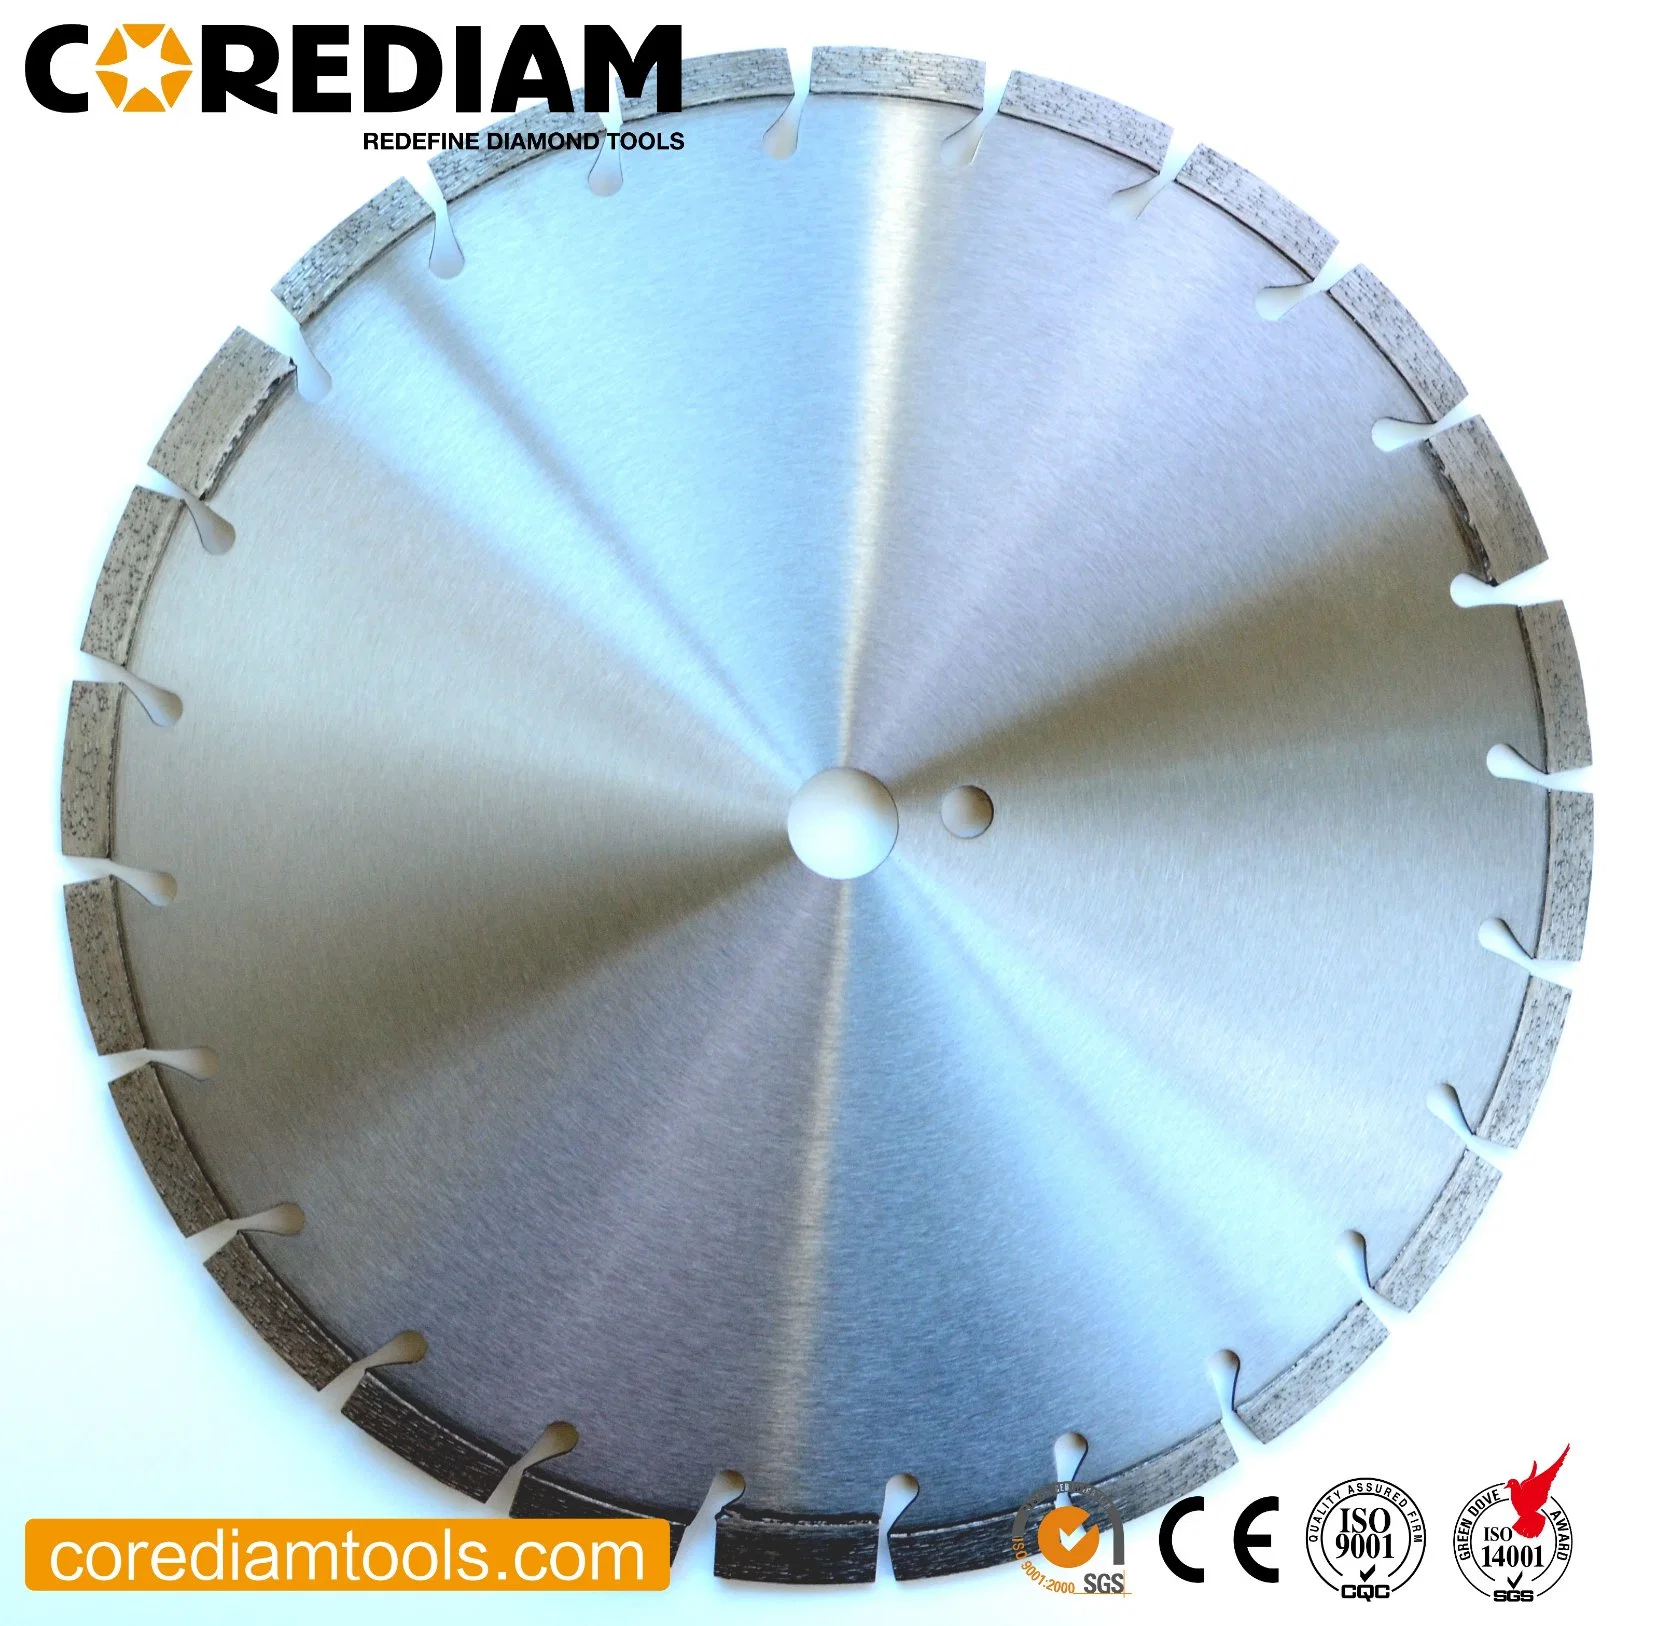 Asphalt Diamond Saw Blade for Road Dry Cutting with Hand-Held Power Saw